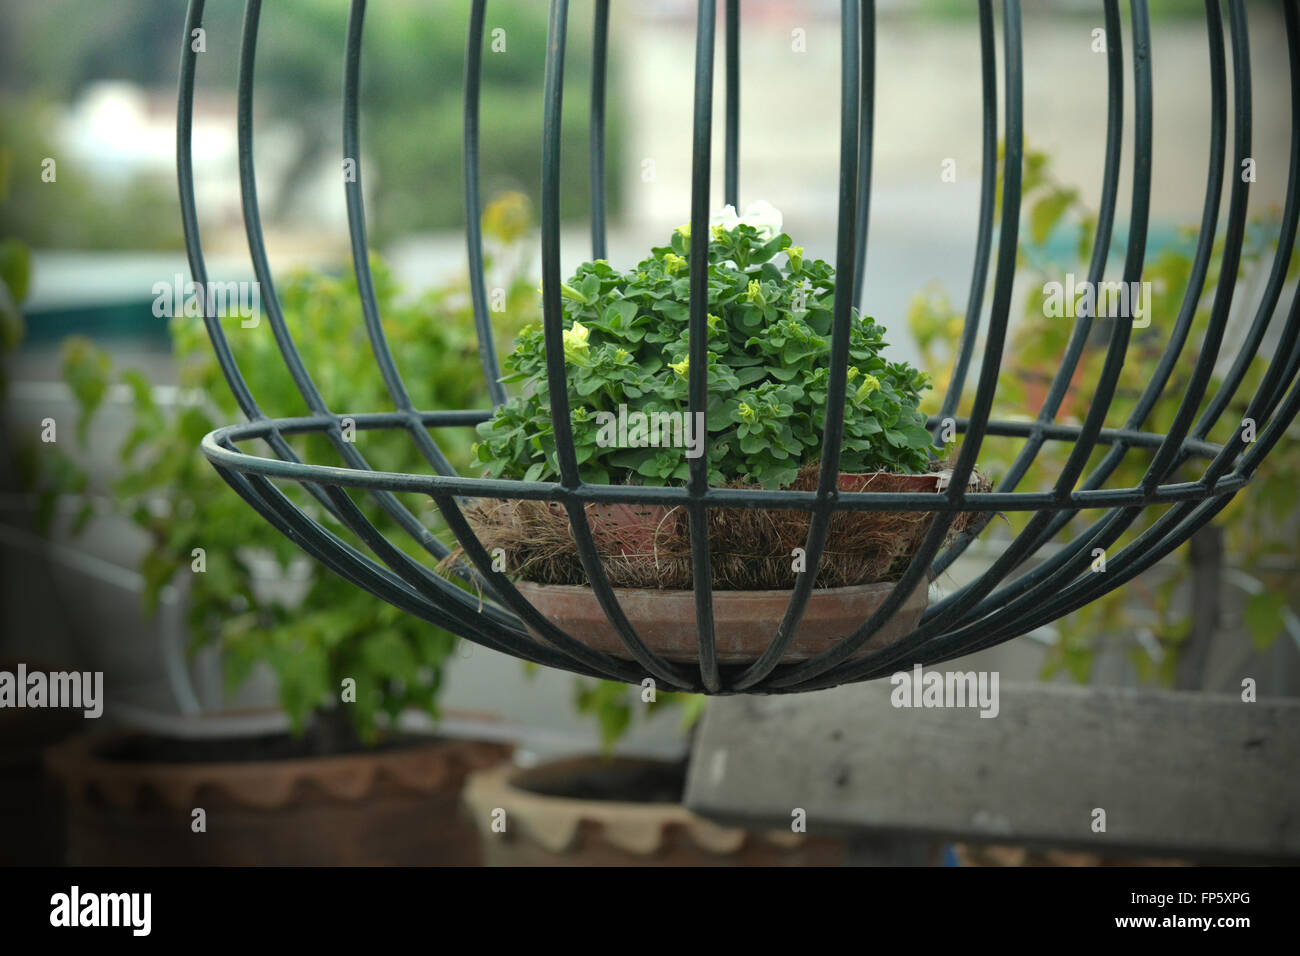 Green plant basket hanging in the garden. Stock Photo